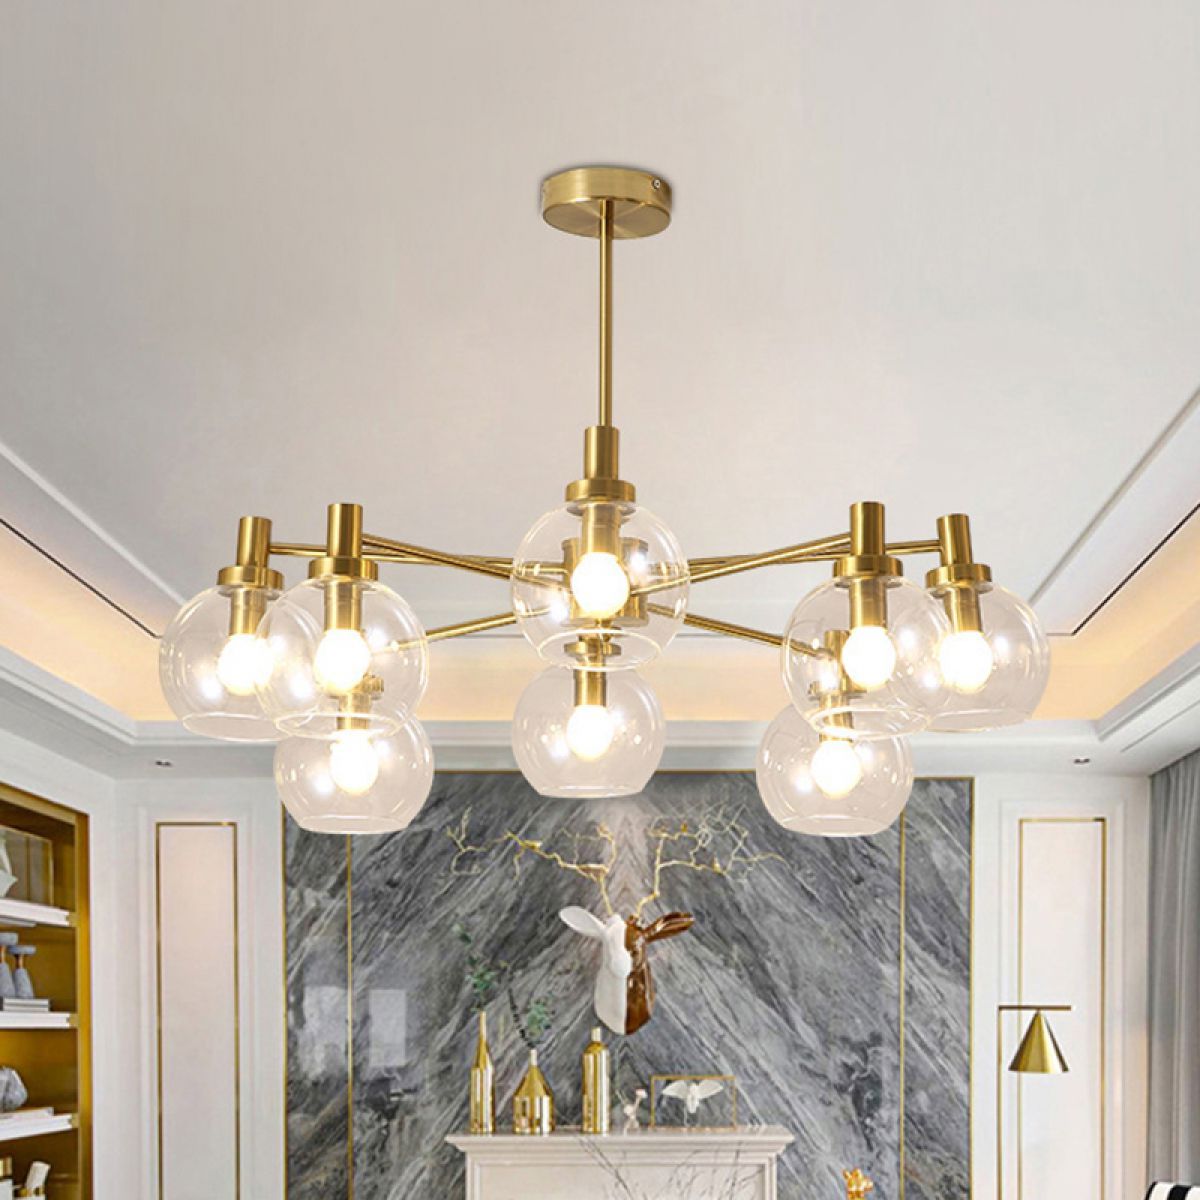 Metal Sputnik Chandelier Lamp Modern 8 Heads Gold Ceiling With Regard To Well Known Gold And Wood Sputnik Orb Chandeliers (View 9 of 21)